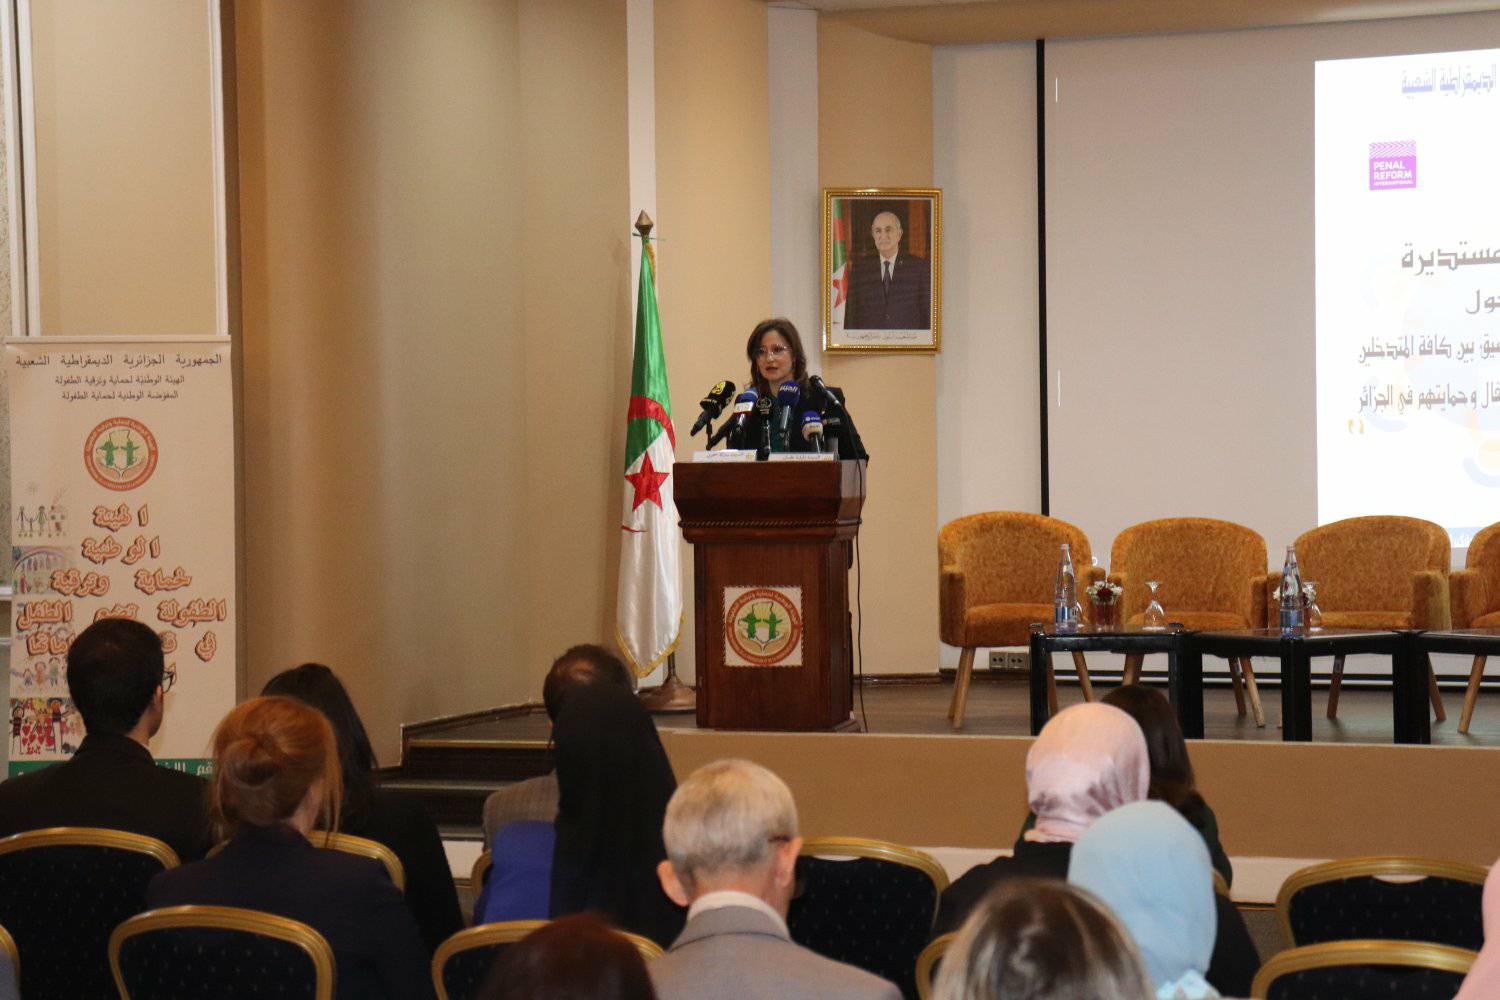 The National Authority for the Protection and Promotion of Childhood organizes a round table on the justice and protection of children in Algeria - Algerian Dialogue